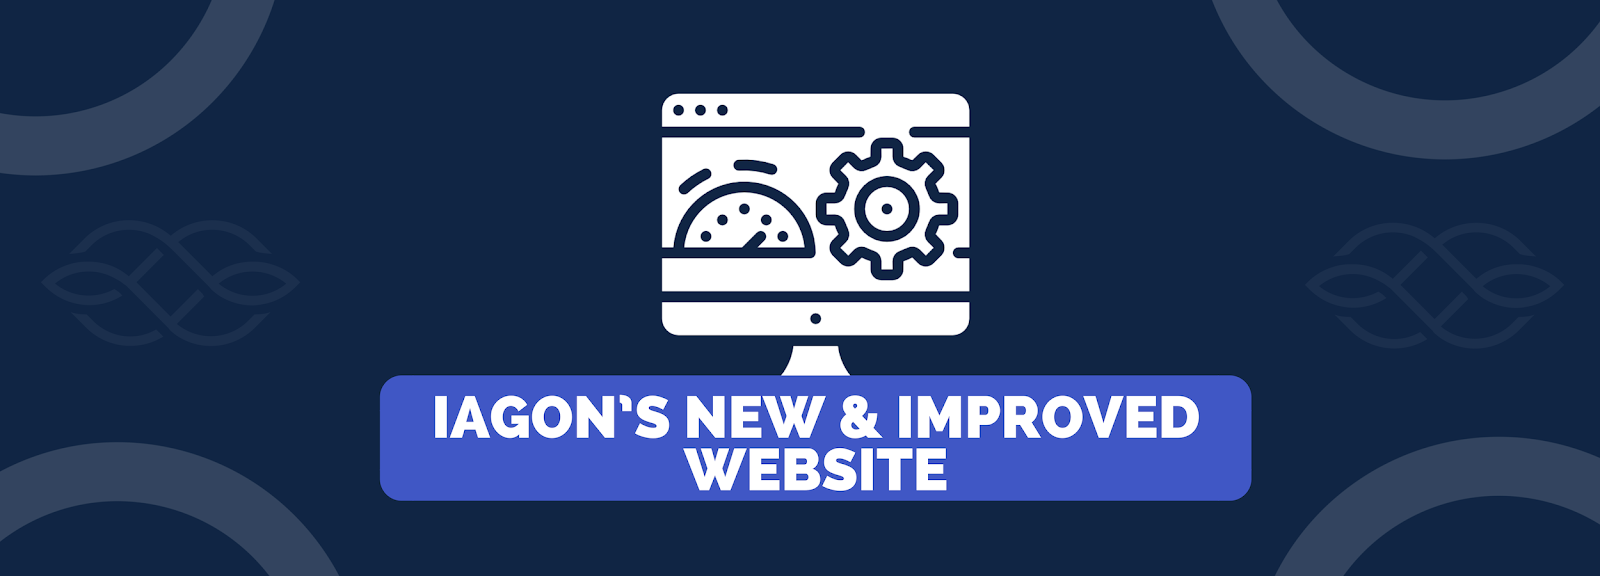 Check Out IAGON’s New & Improved Website